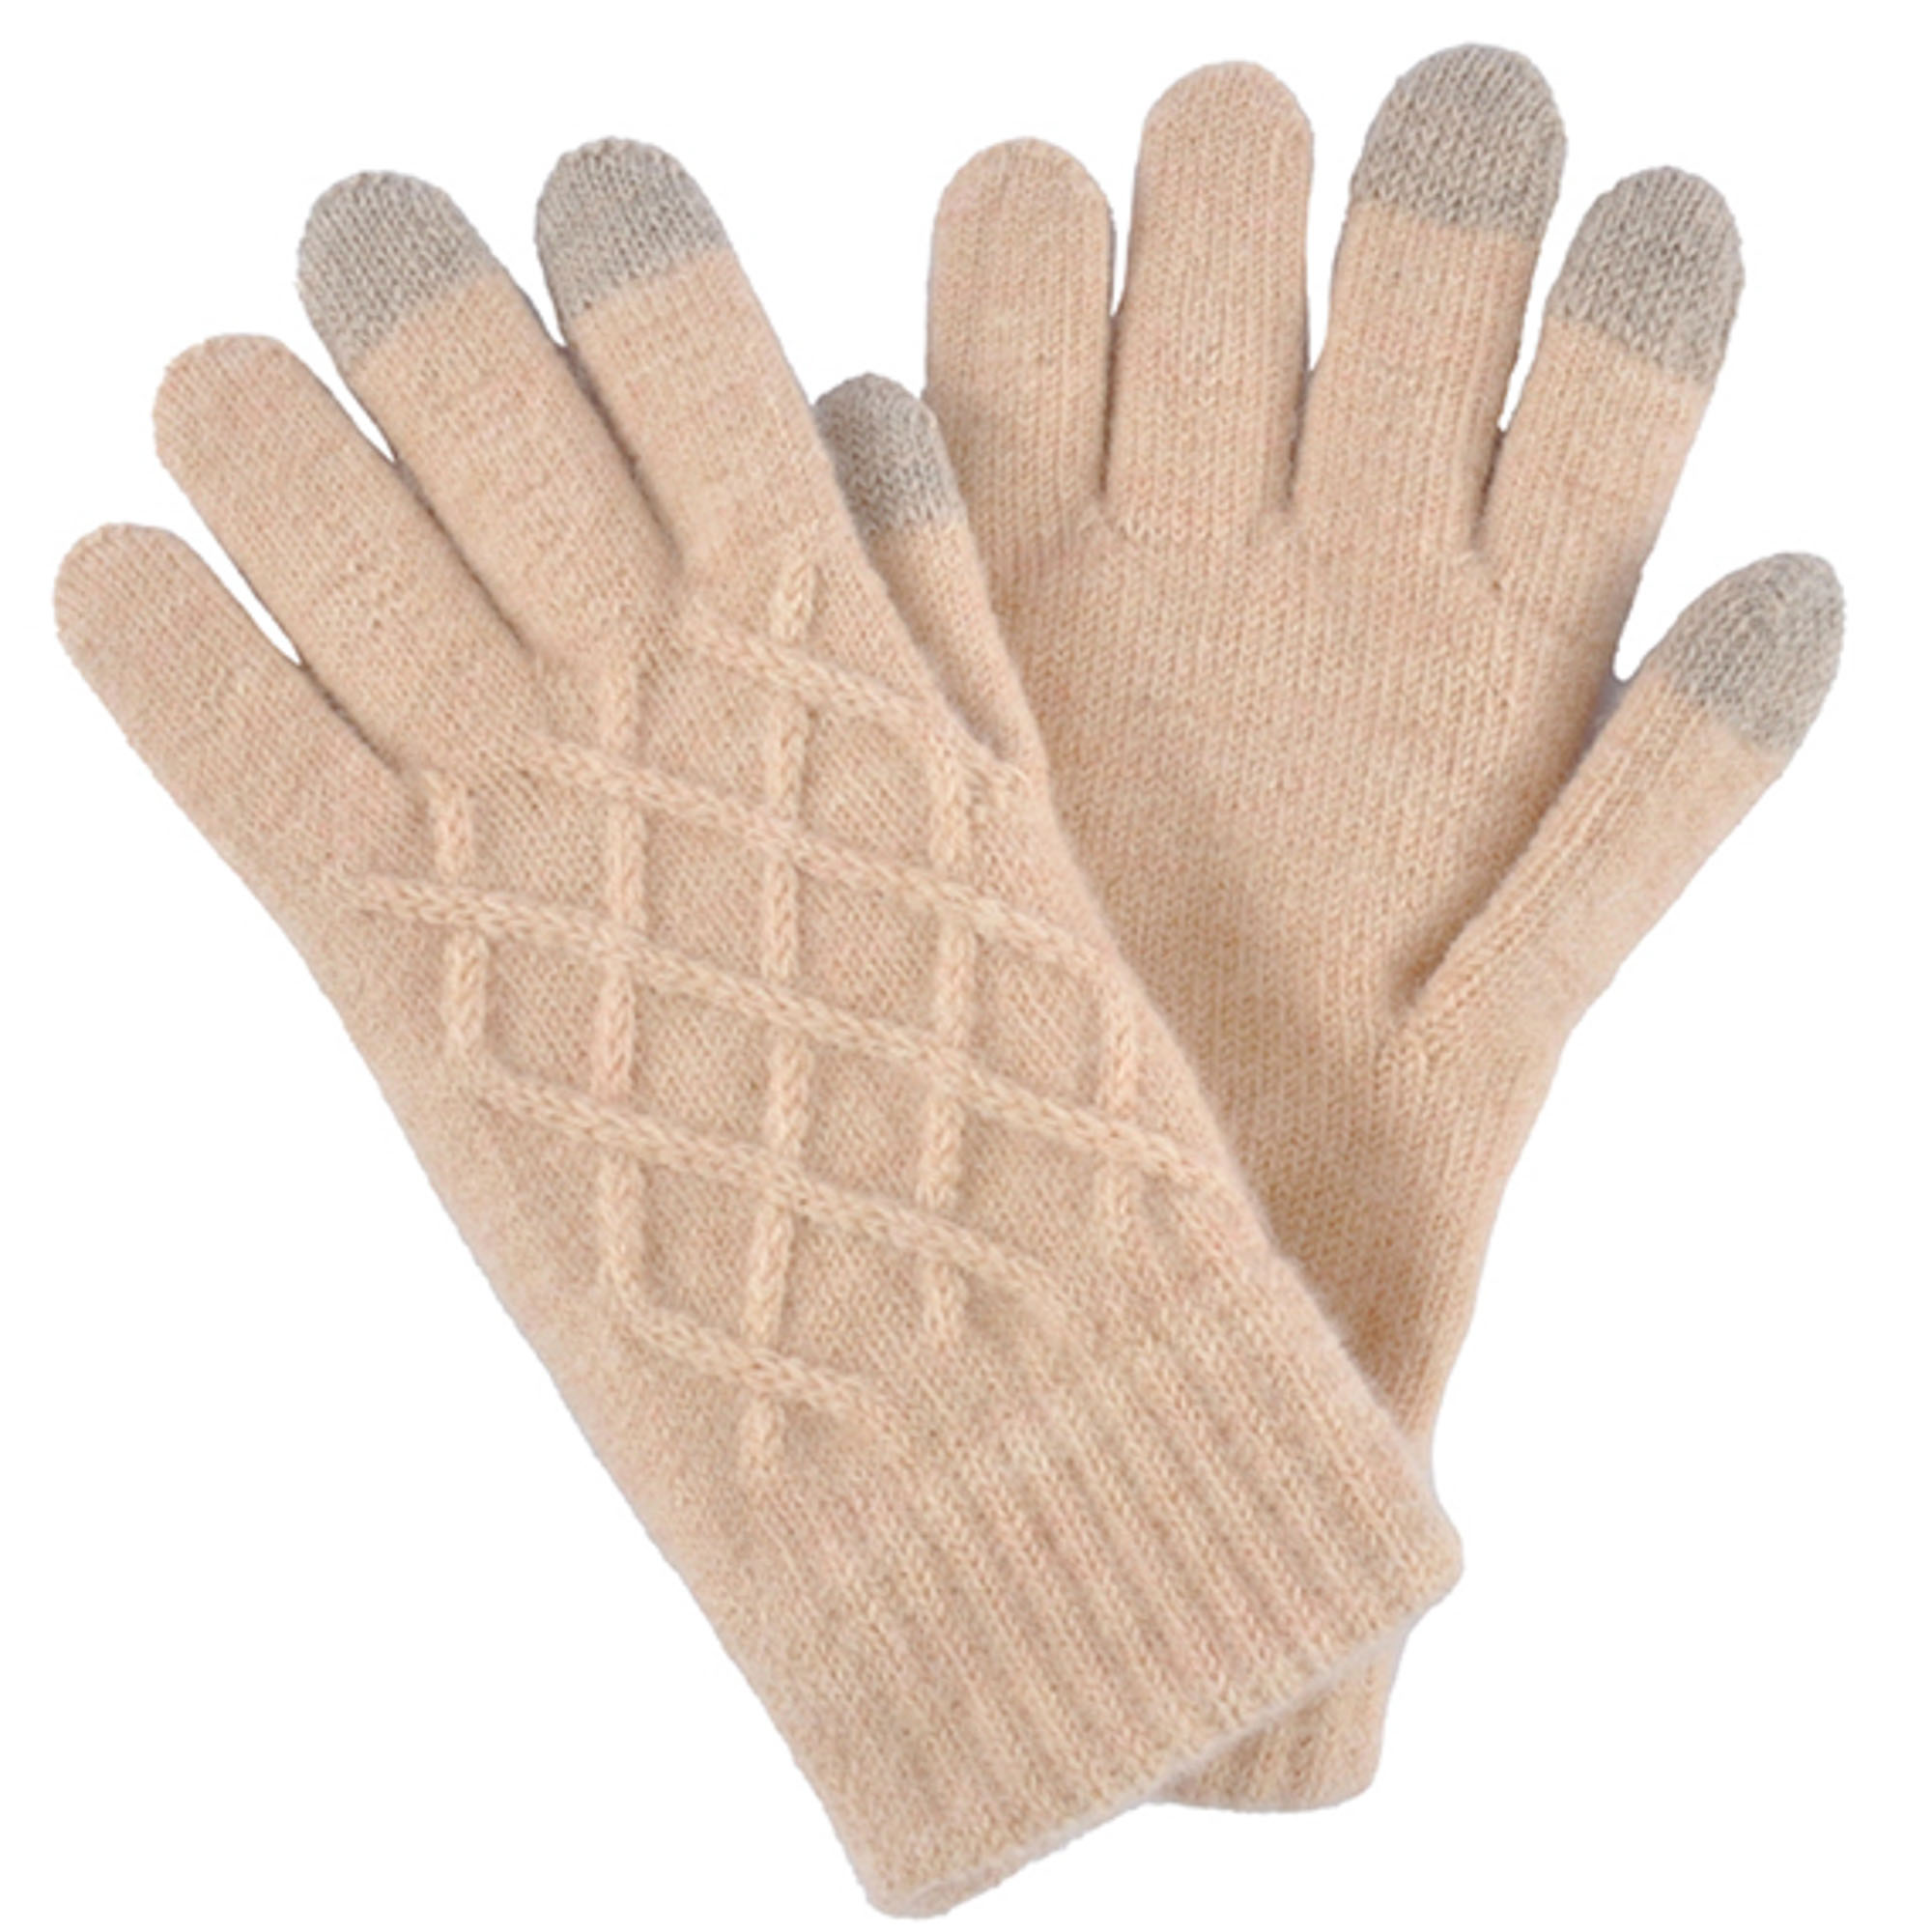 SOFT KNIT SMART TOUCH GLOVES